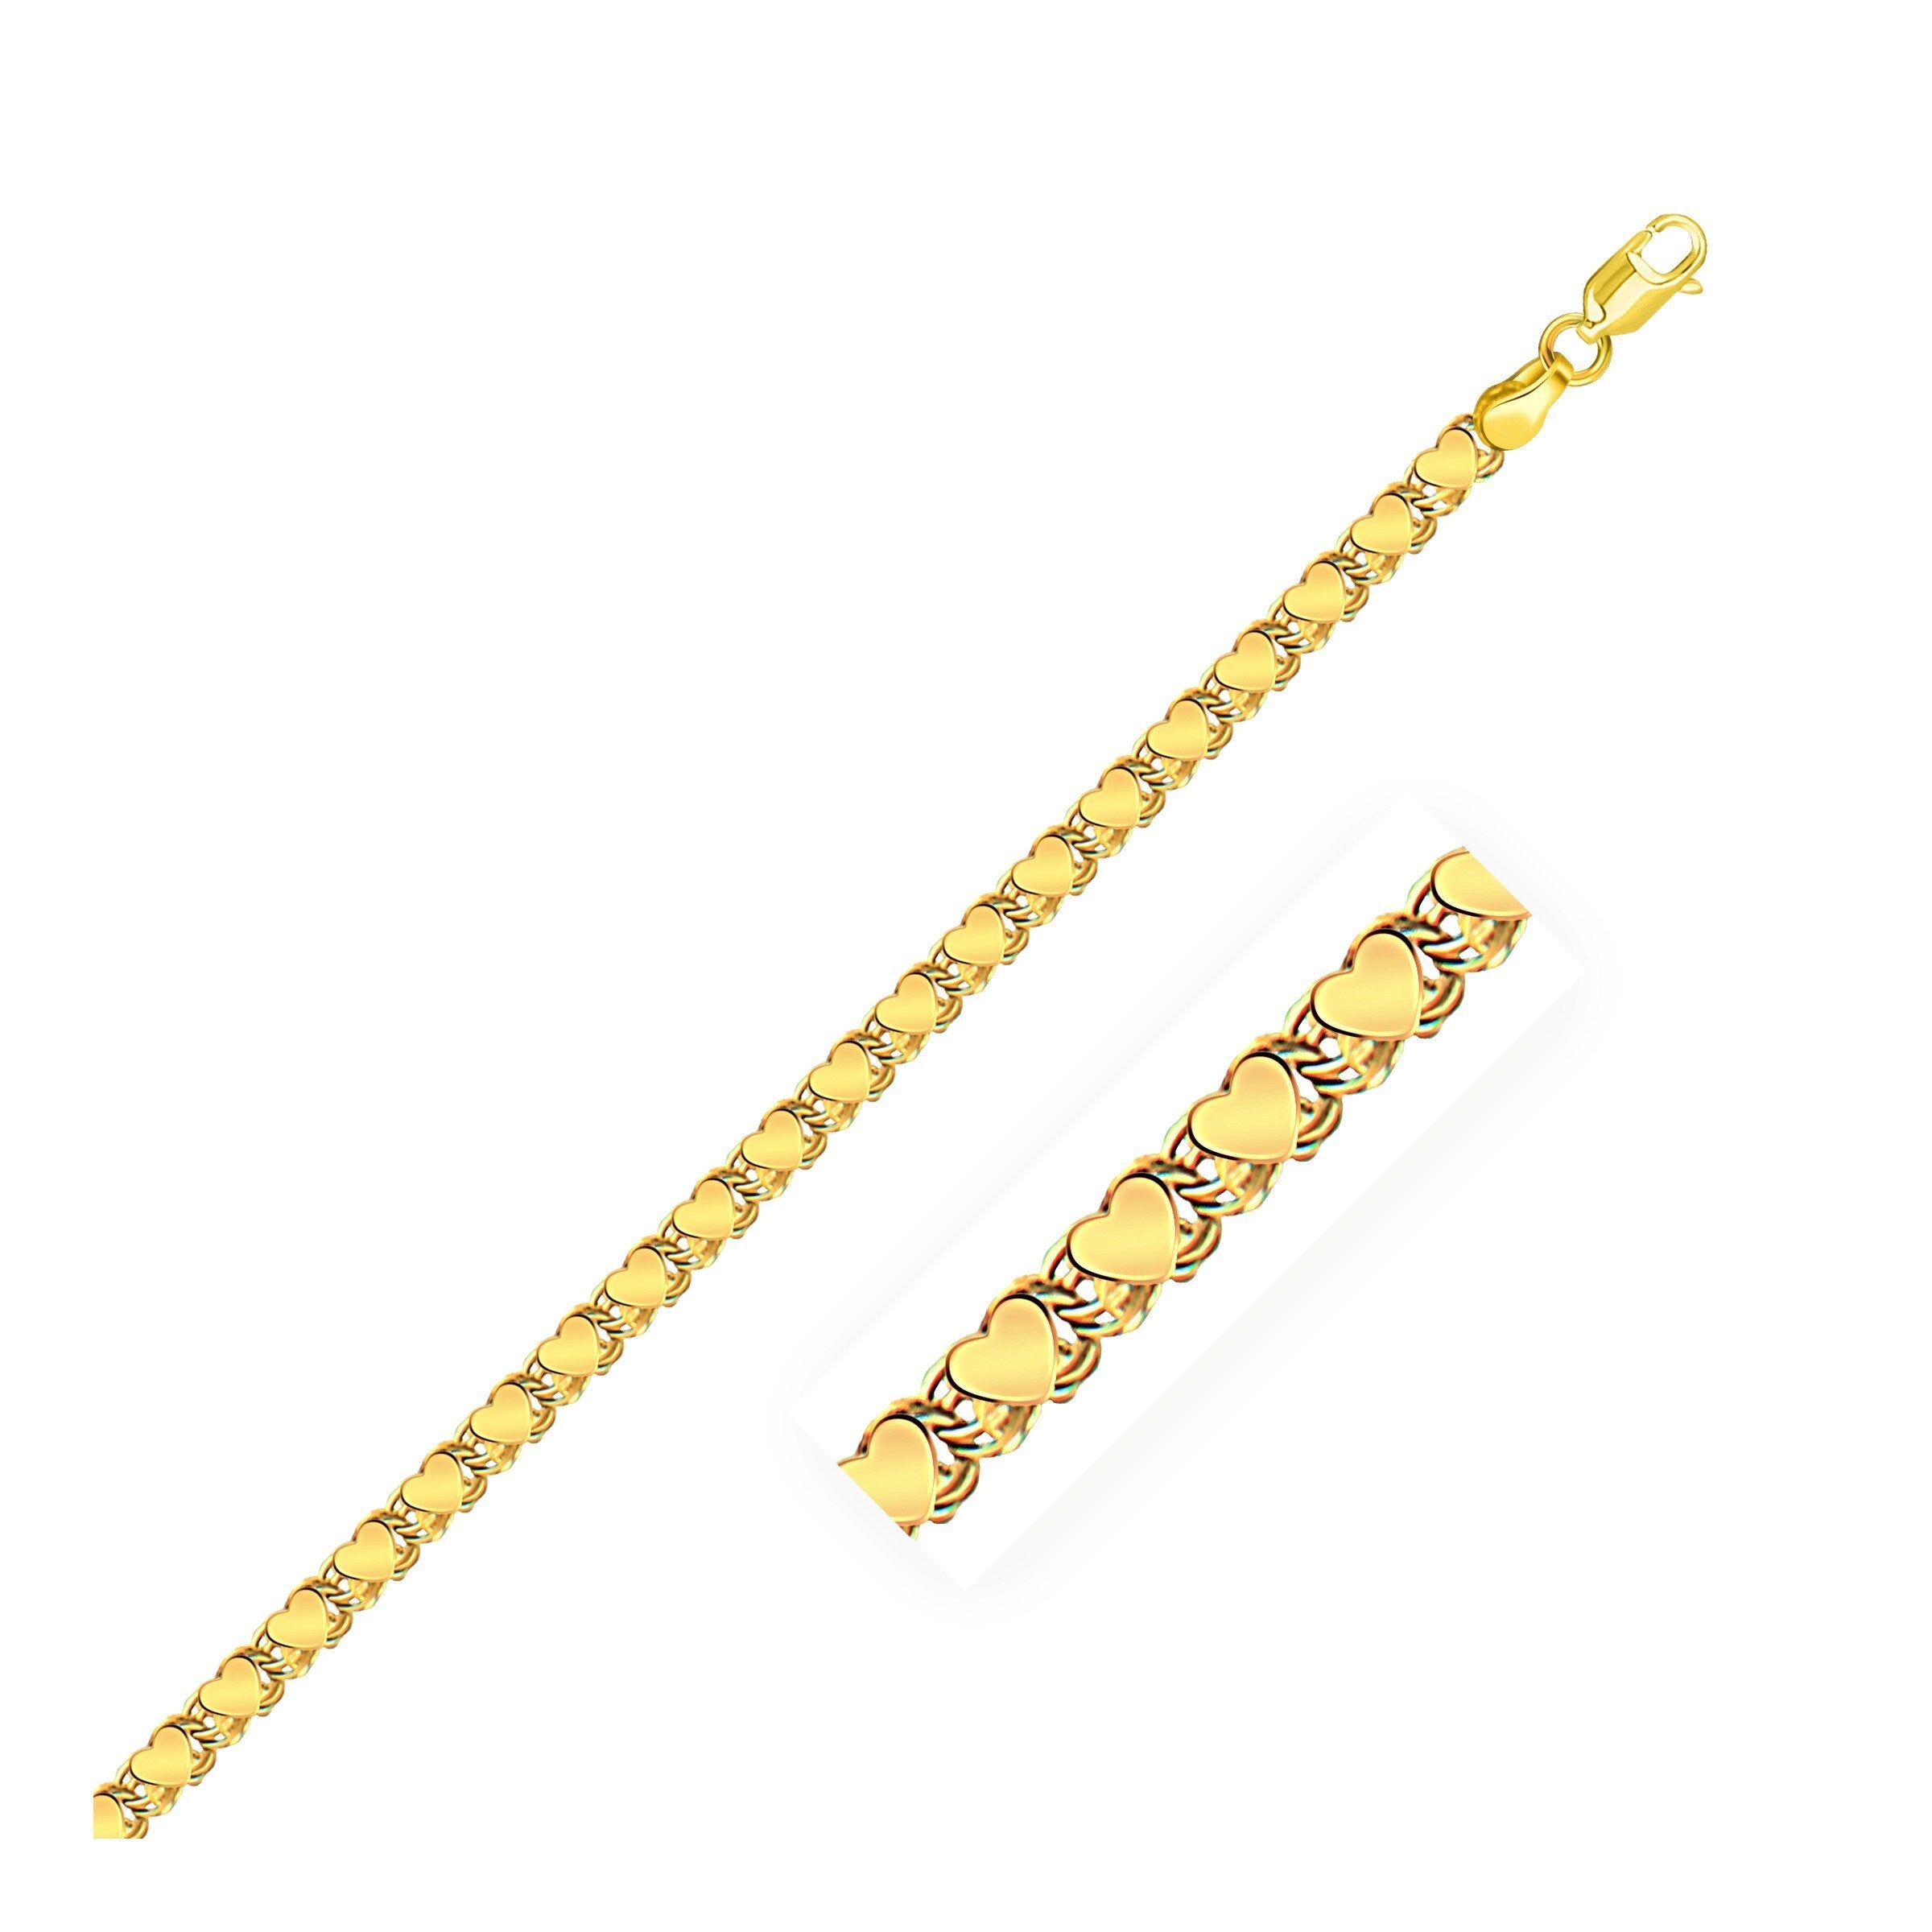 3.3mm 14k Yellow Gold Heart Anklet, size 10''